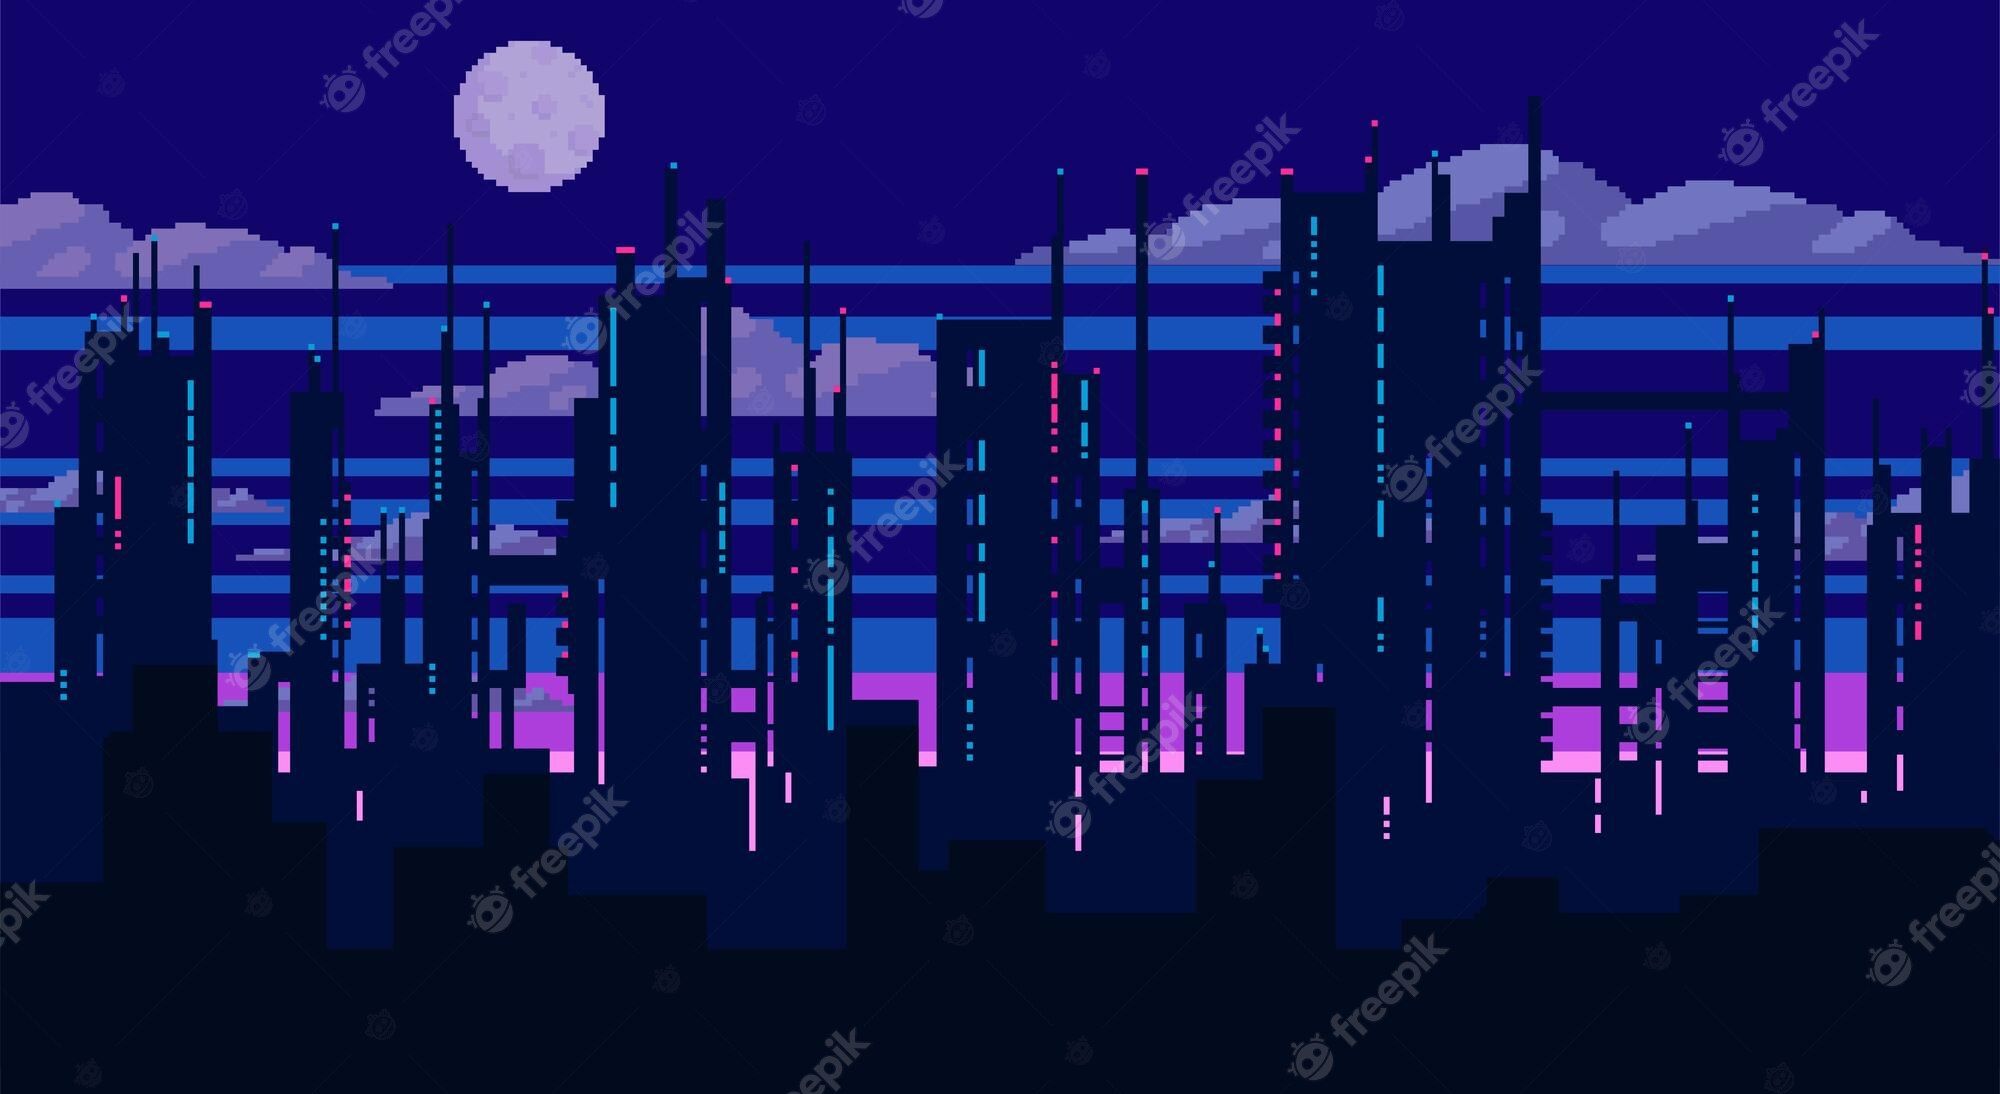 Premium Vector. Pixel art game background with city silhouette stars and moon vector eps 10